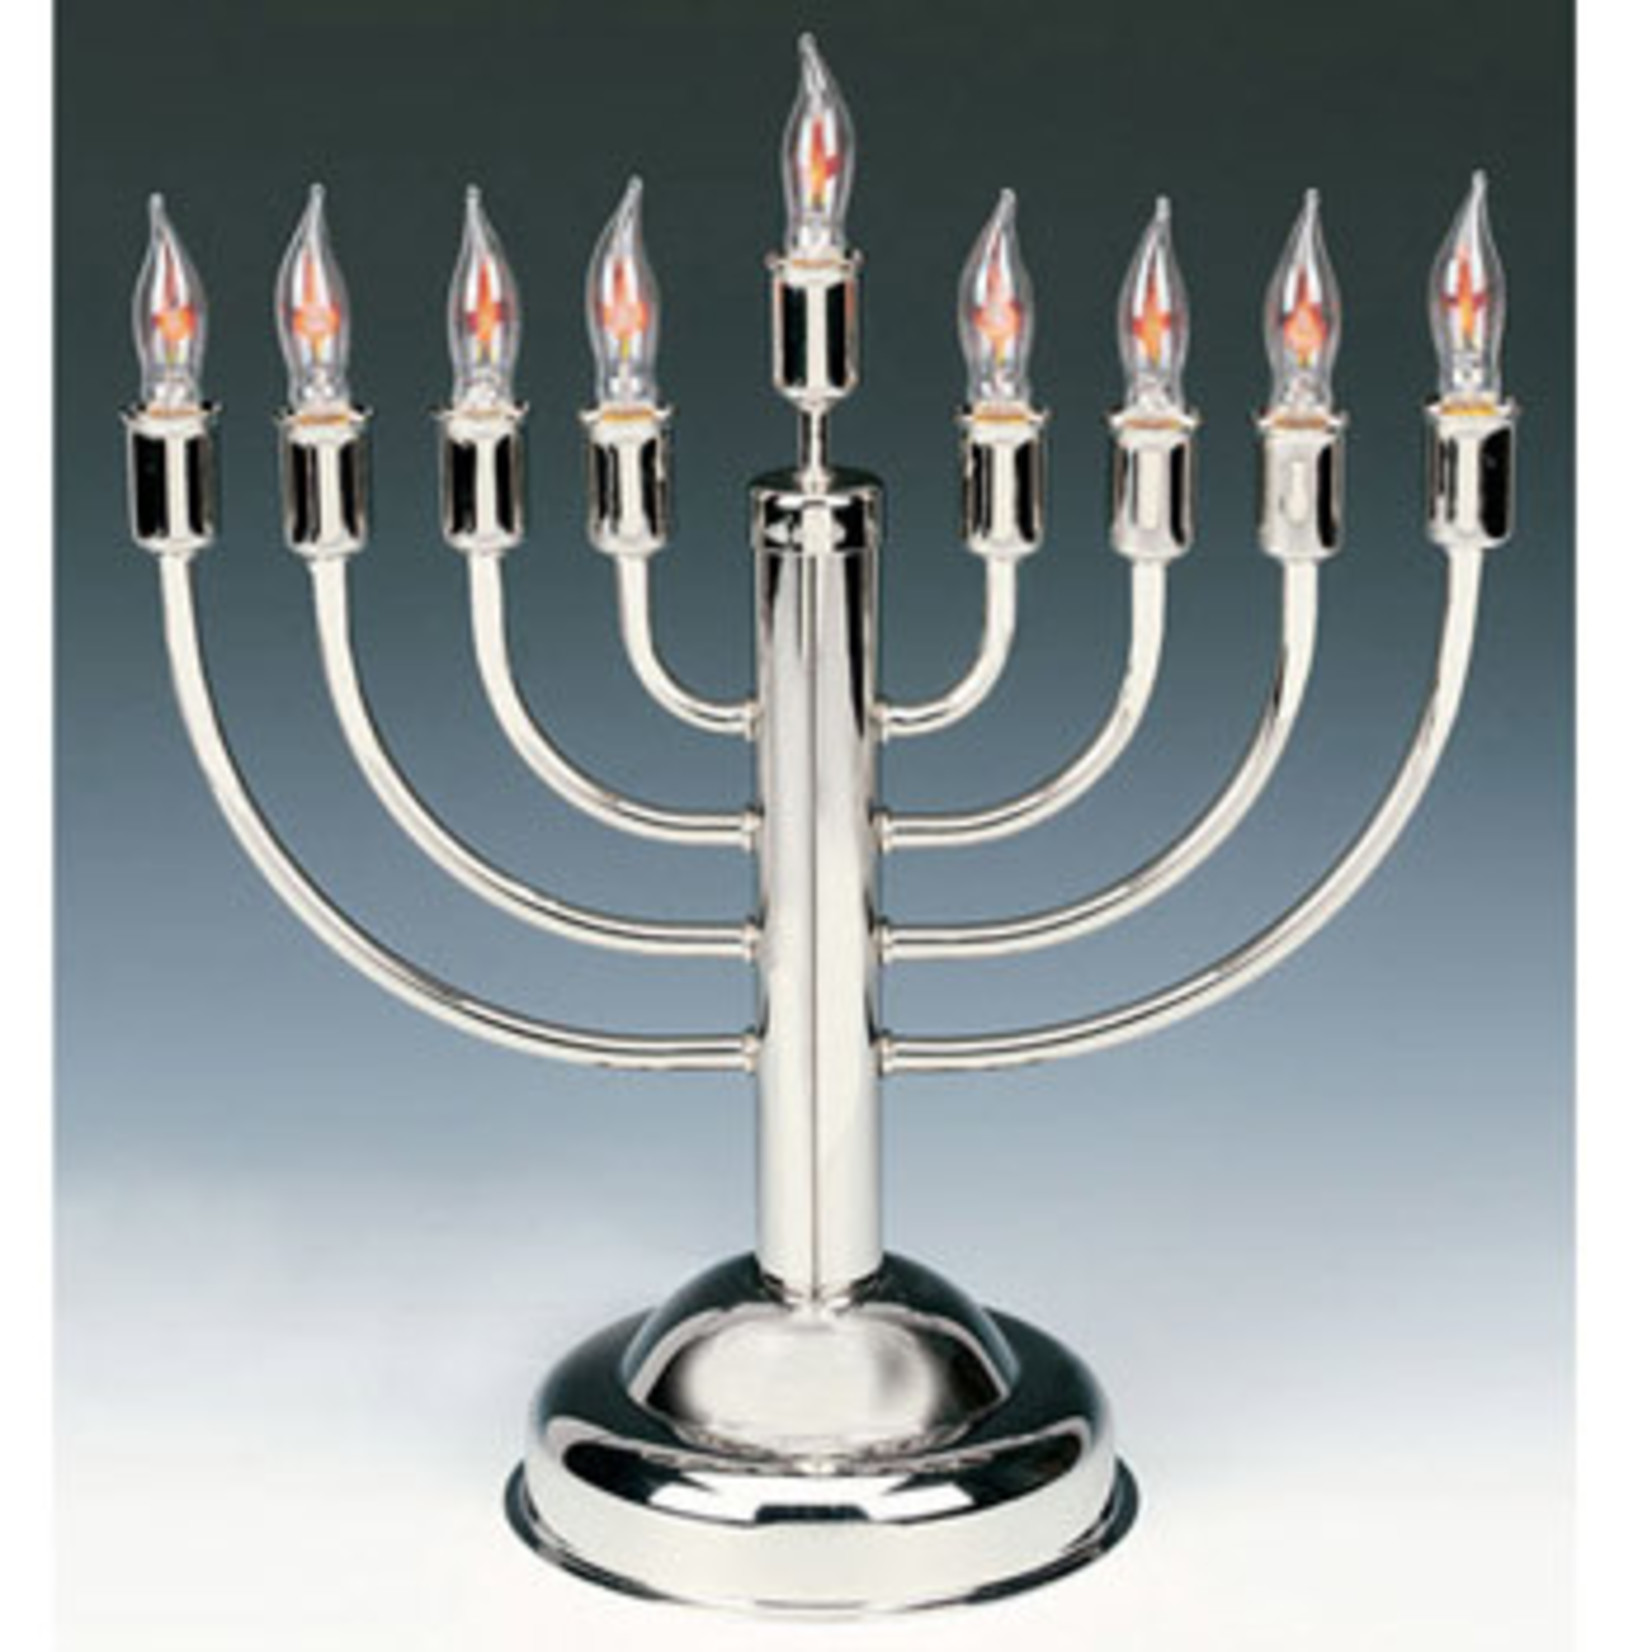 Chrome Plated Electric Menorah with Flickering Bulbs-Round Base